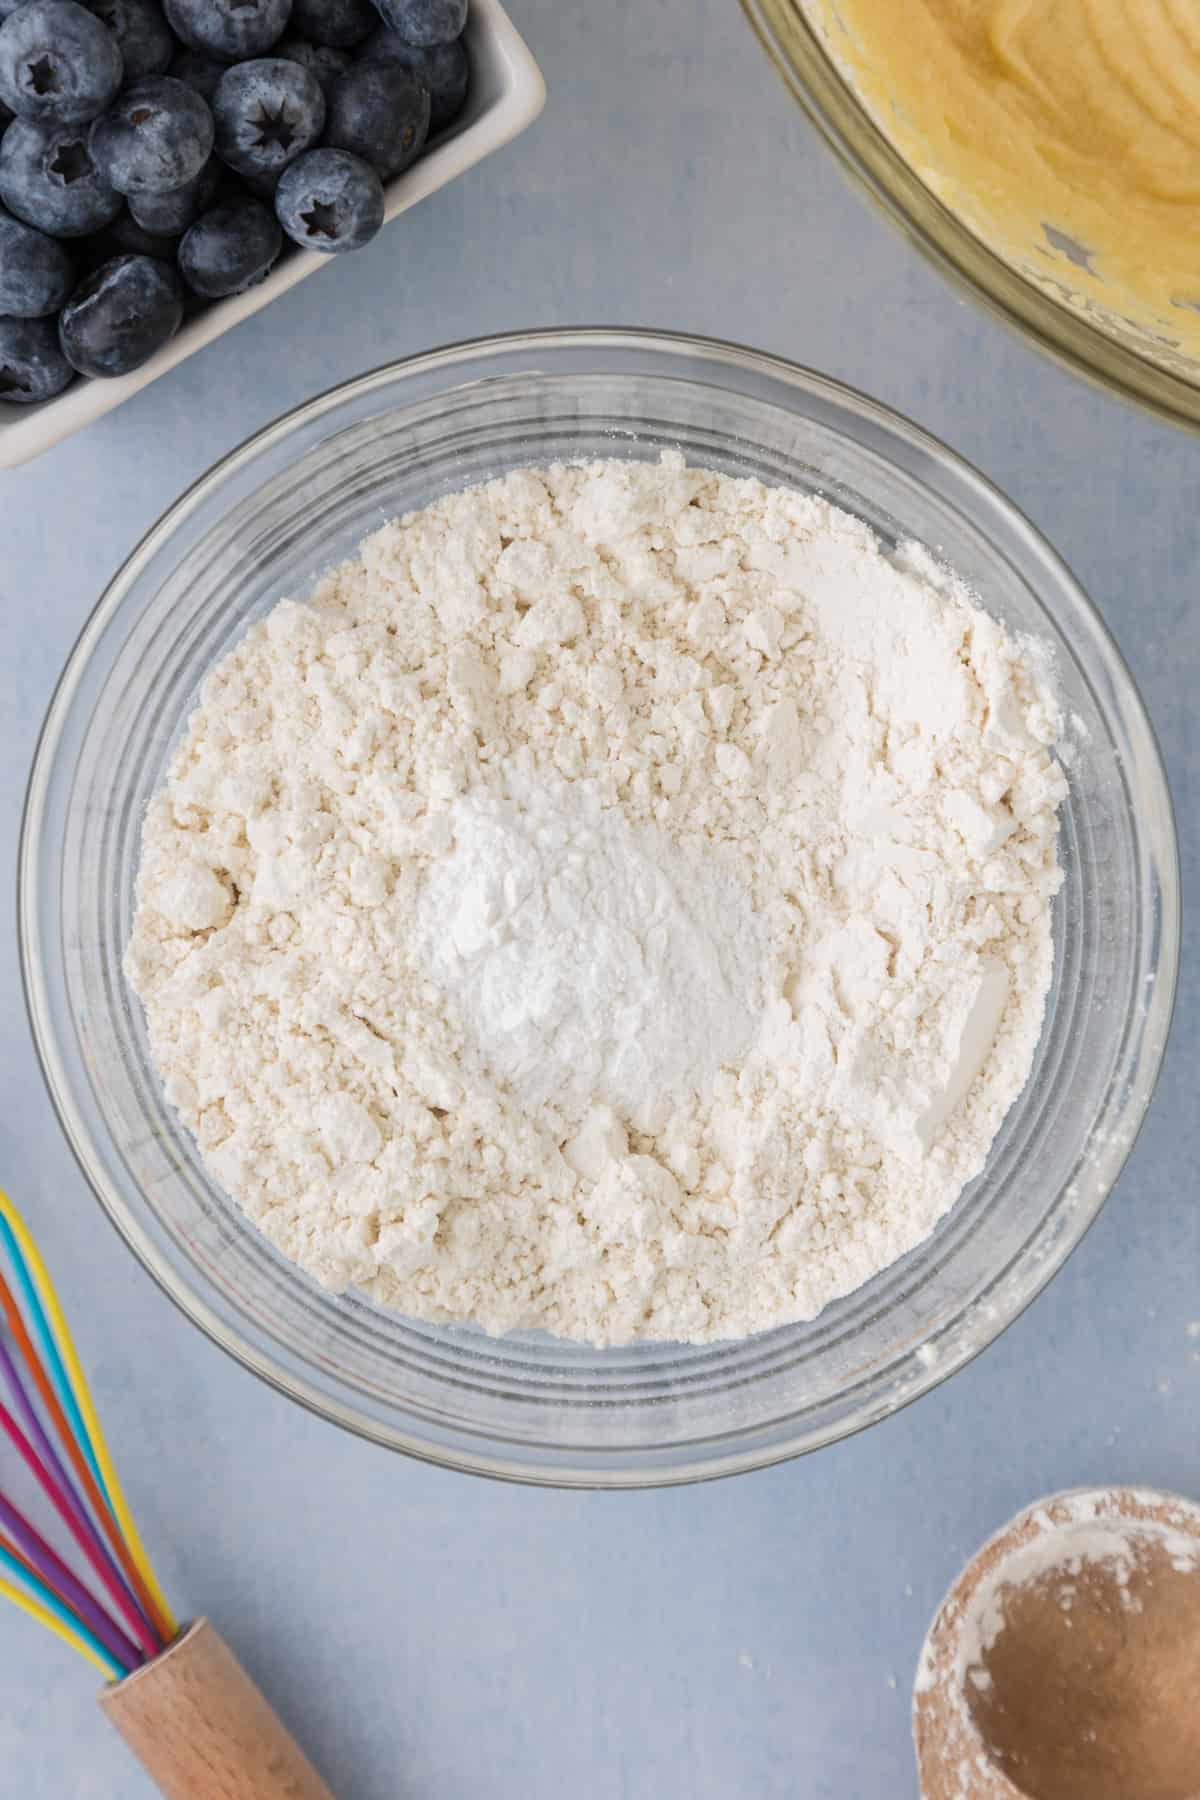 A bowl of flour and blueberries next to a whisk.